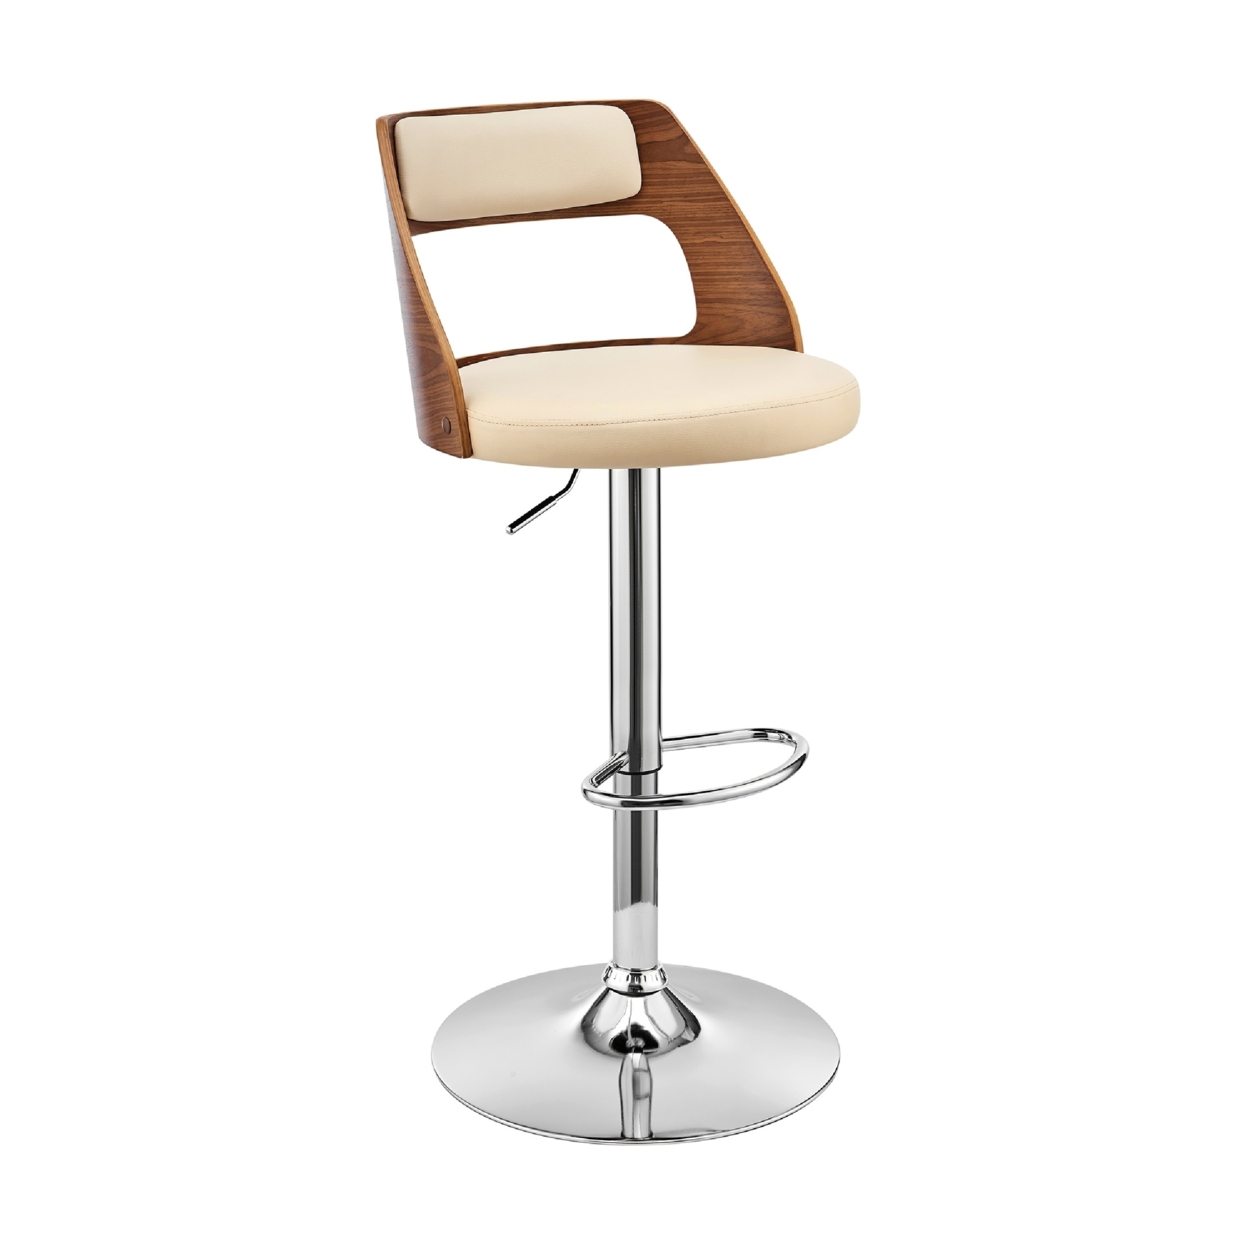 Adjustable Barstool With Open Wooden Back, Cream And Brown- Saltoro Sherpi